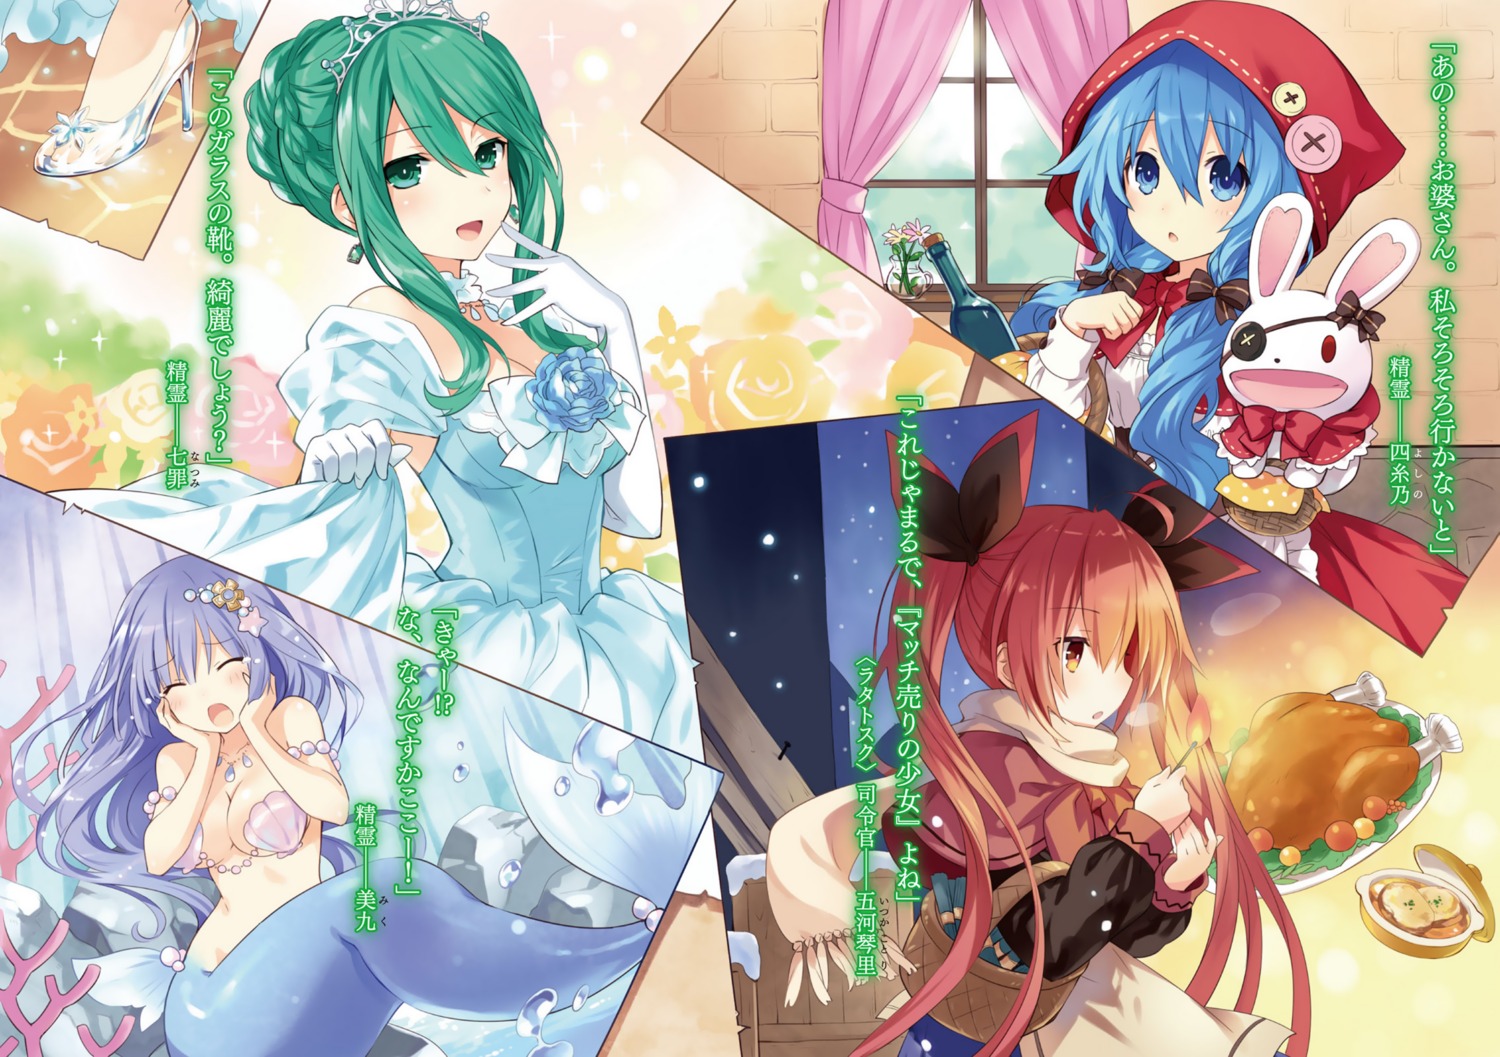 cinderella cinderella_(character) cleavage cosplay date_a_live dress heels itsuka_kotori izayoi_miku little_red_riding_hood_(character) mermaid monster_girl natsumi_(date_a_live) pasties tail the_little_match_girl the_little_mermaid the_little_mermaid_(character) topless tsunako yoshino_(date_a_live)